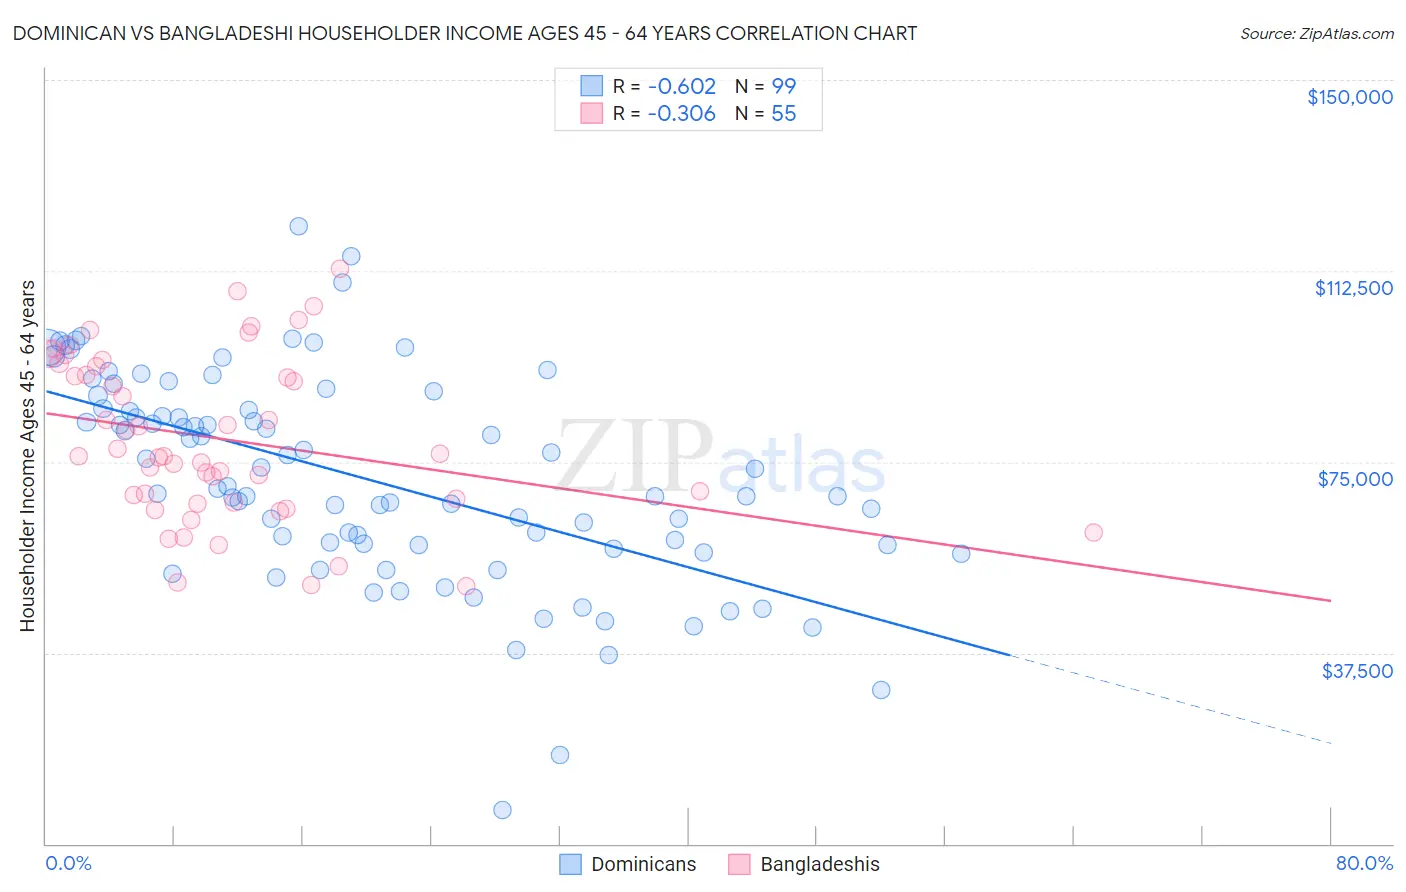 Dominican vs Bangladeshi Householder Income Ages 45 - 64 years